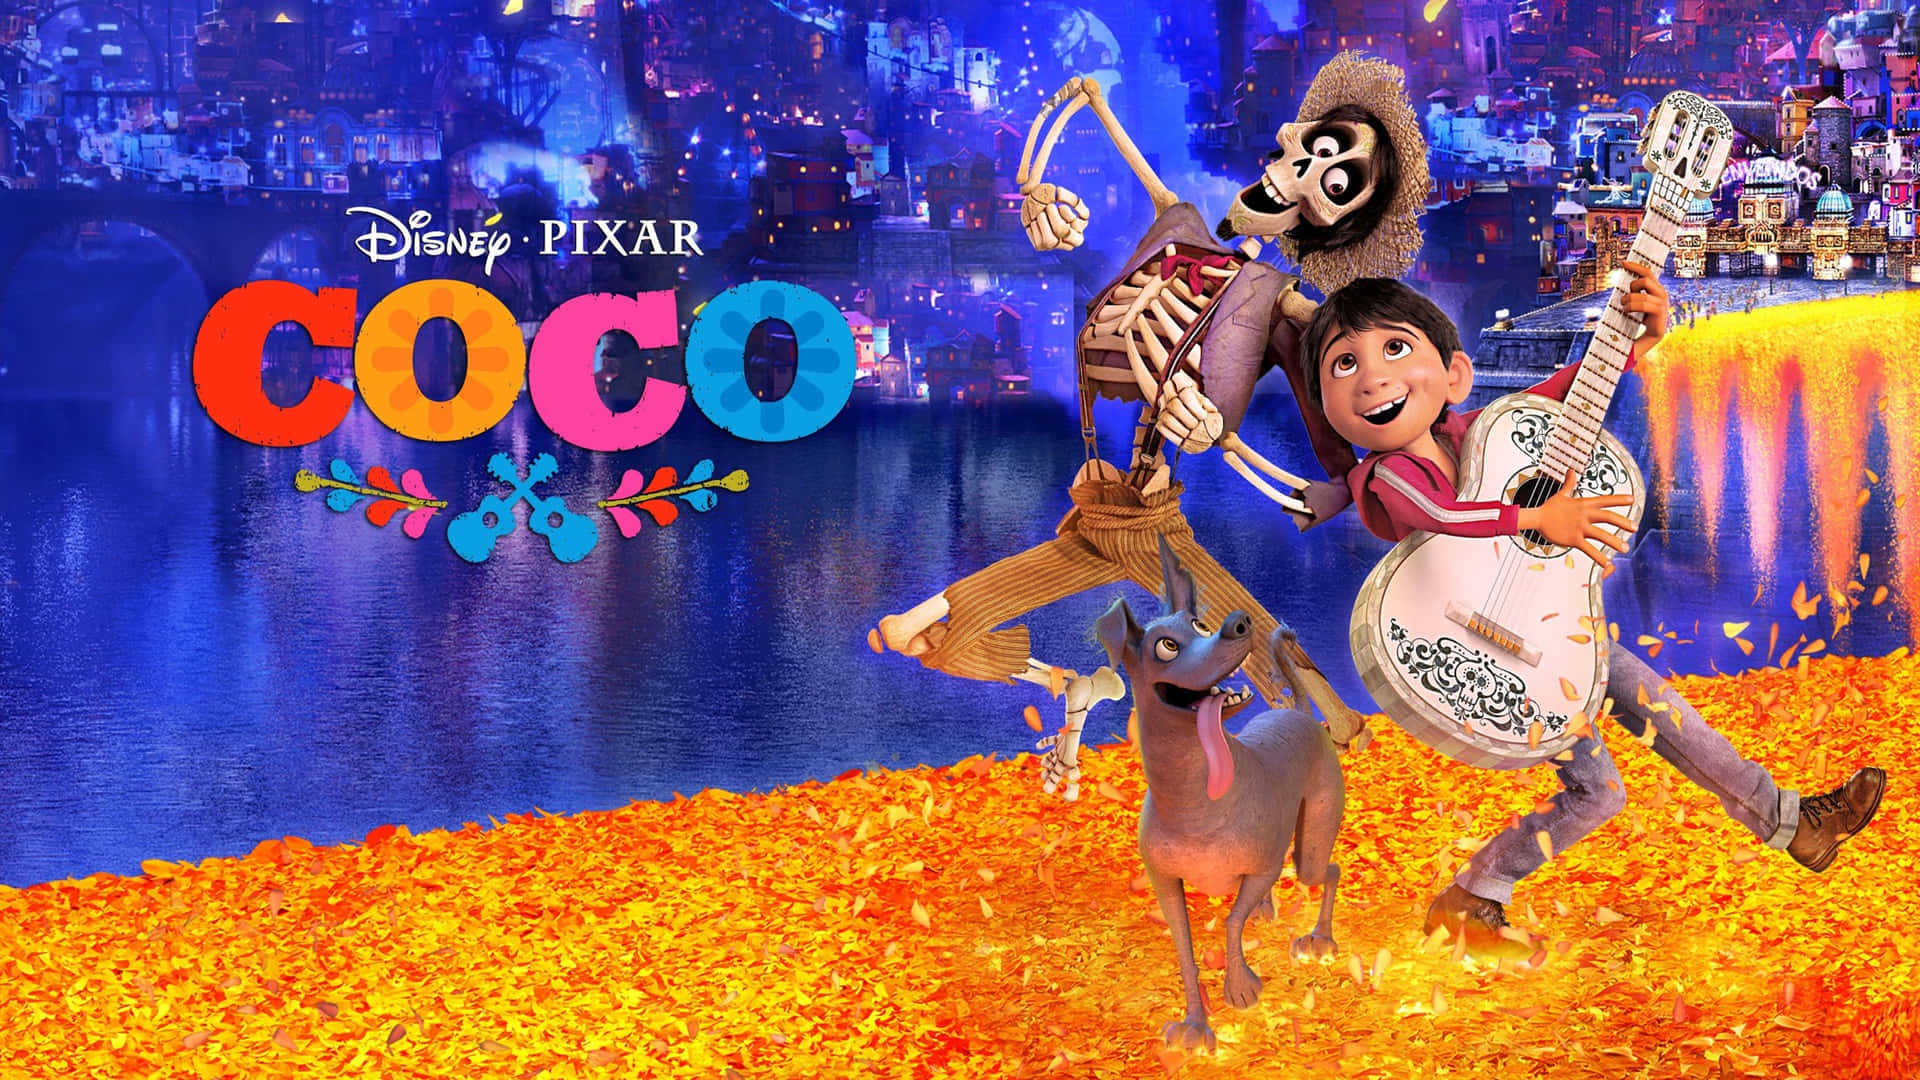 "Celebrate Mexican culture and the spirit of Coco with this timeless Disney film." Wallpaper